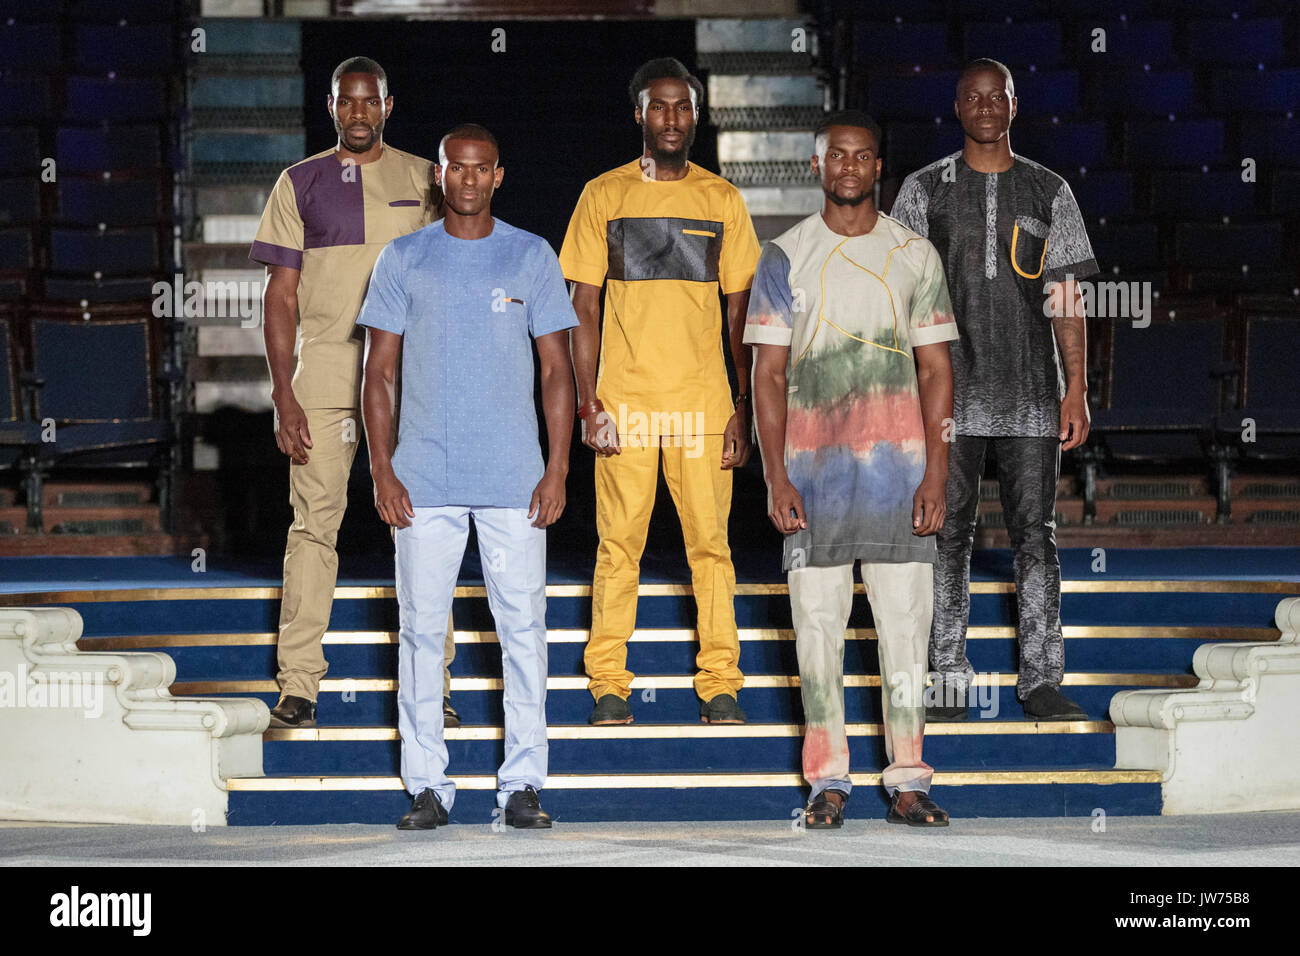 London, UK, 11th August 2017. The Kola Kuddus designs are presented. Models on the second runway of the day, with designs by Godwin Green, Araewa, Bijelly, Regallia, Maufechi, Monami 4 Moremi, Kola Kuddus. Since debuting in 2011, the two day Africa Fashion Week London, AFWL, has grown into one of the largest Africa inspired fashion events in Europe. Stock Photo